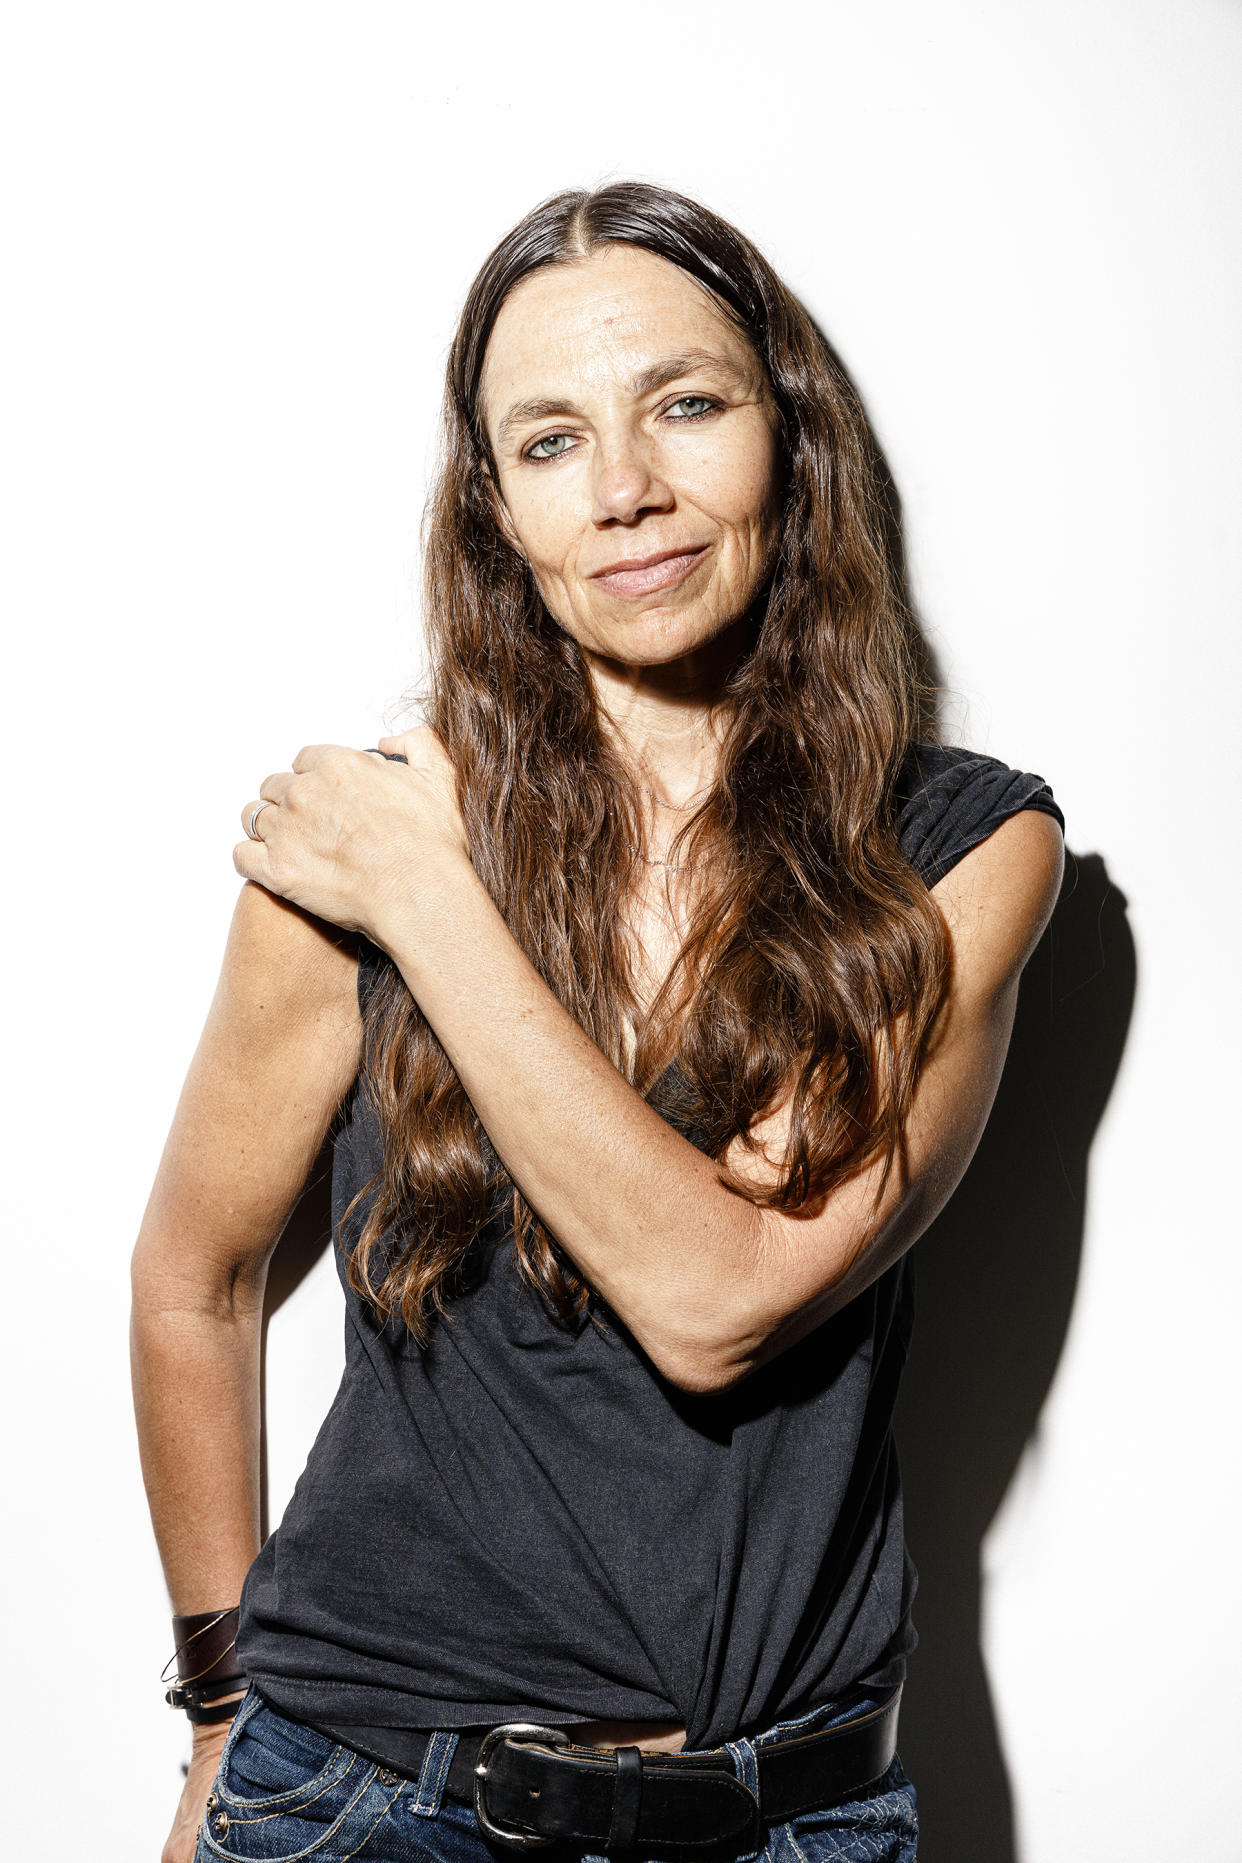 Justine Bateman photographed by Steven Meiers Dominguez for FACE One Square Foot of Skin